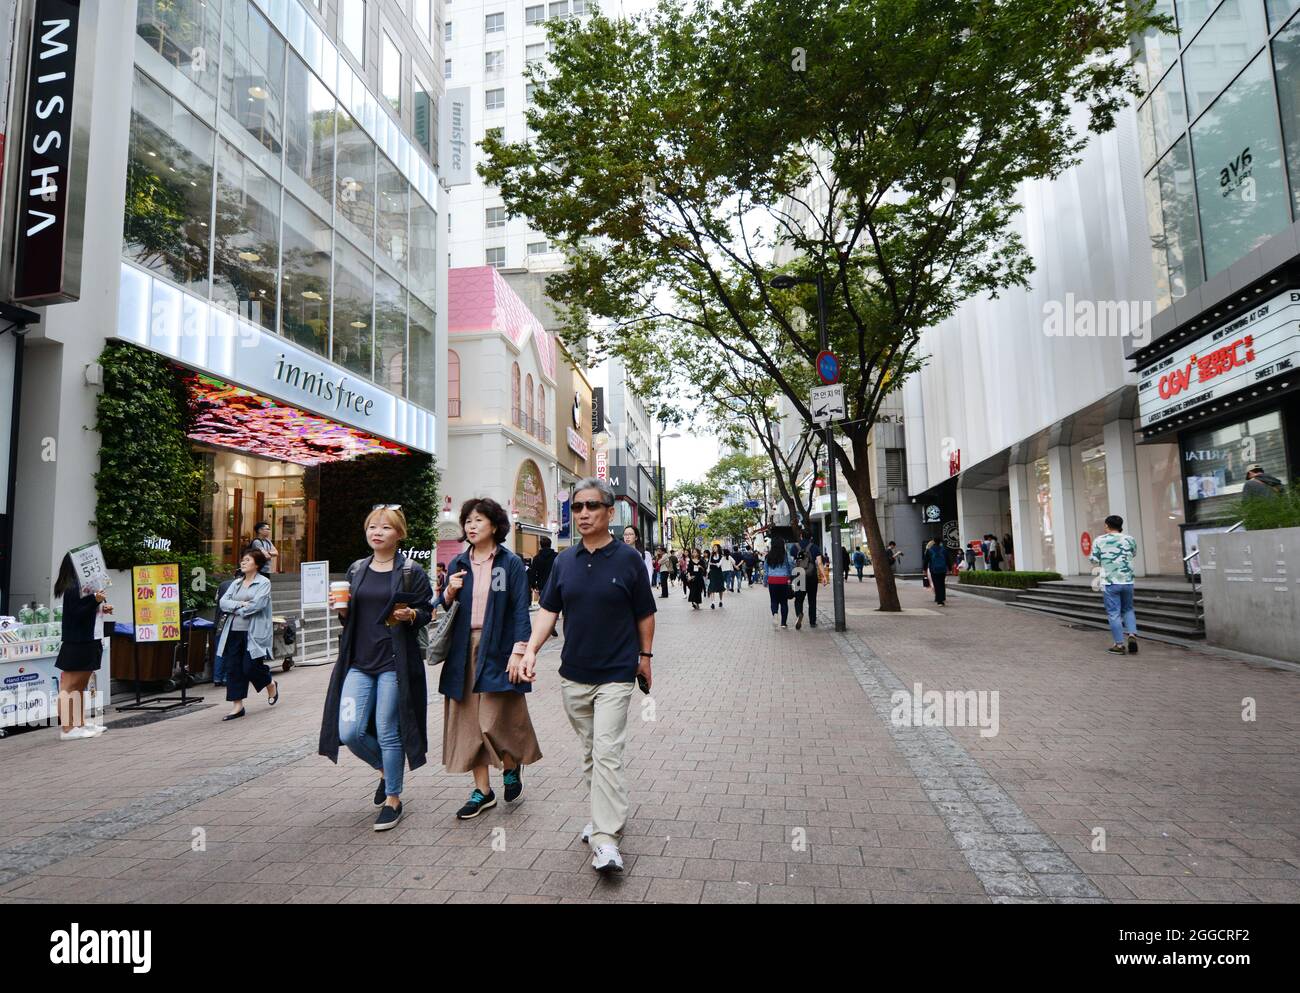 The vibrant Myeongdong shopping district in Seoul, South Korea. Stock Photo